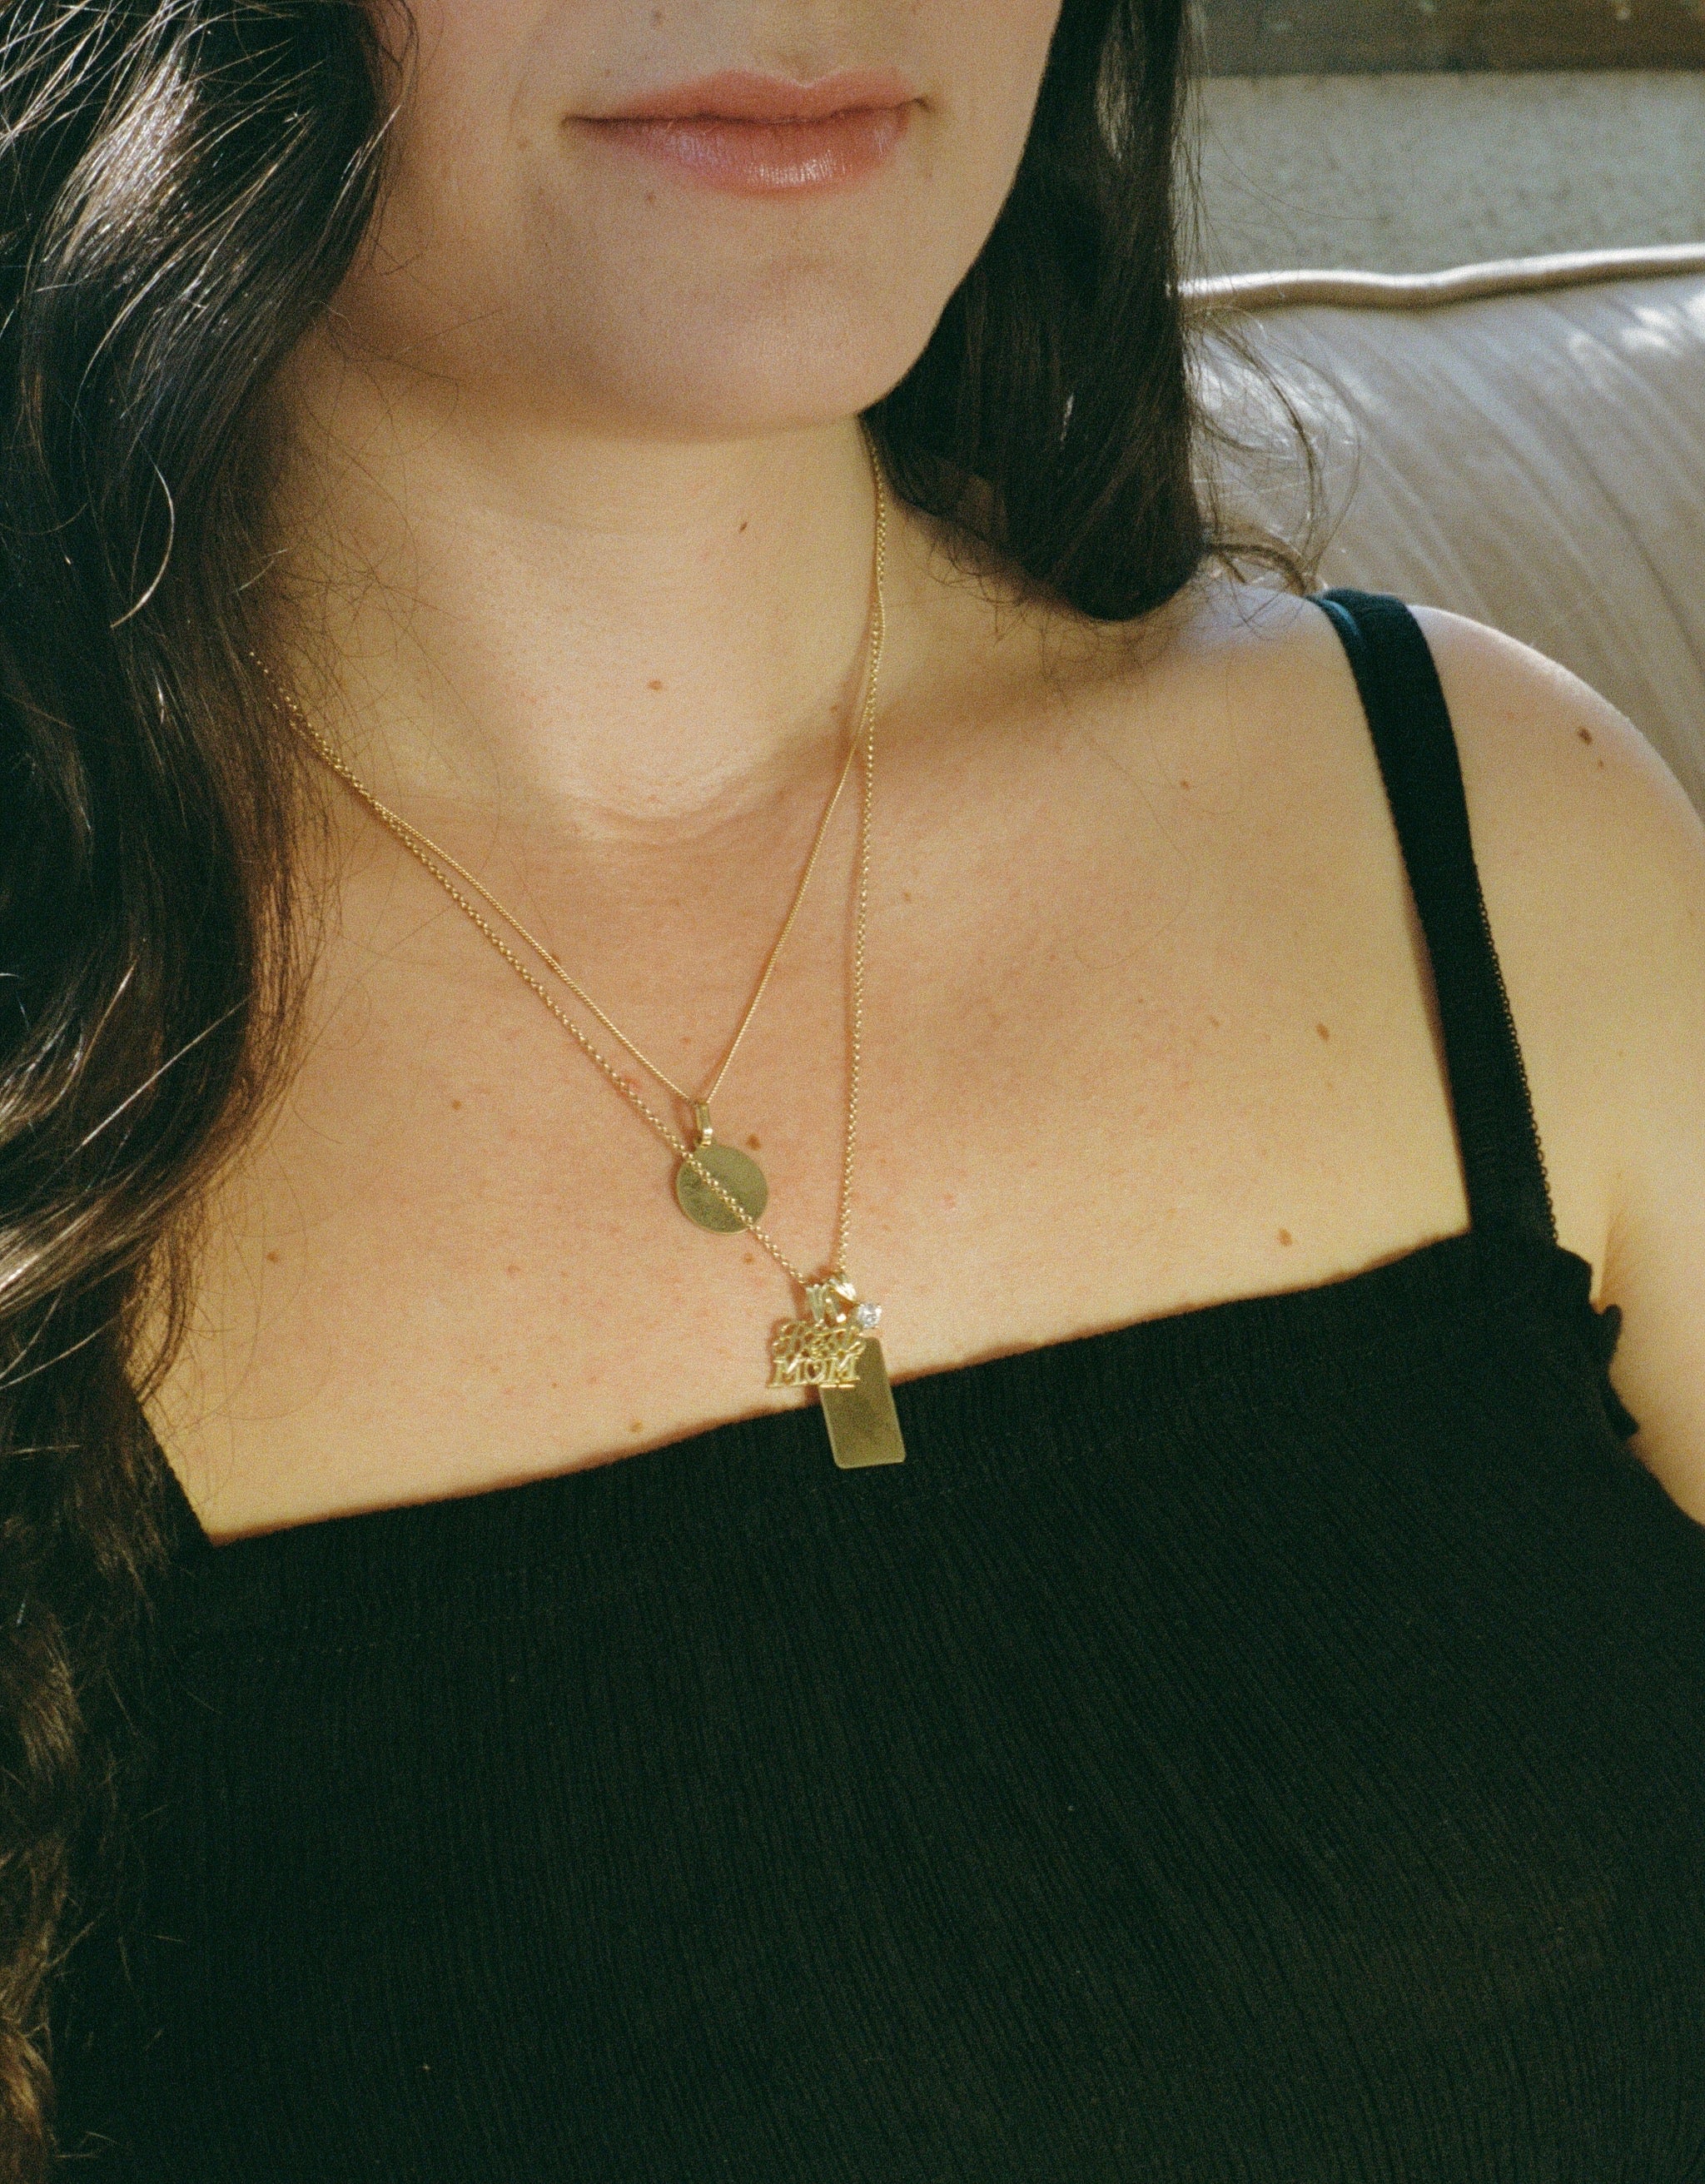 "Best Mom" Pendant in 10K gold with a thin curb chain or figaro chain